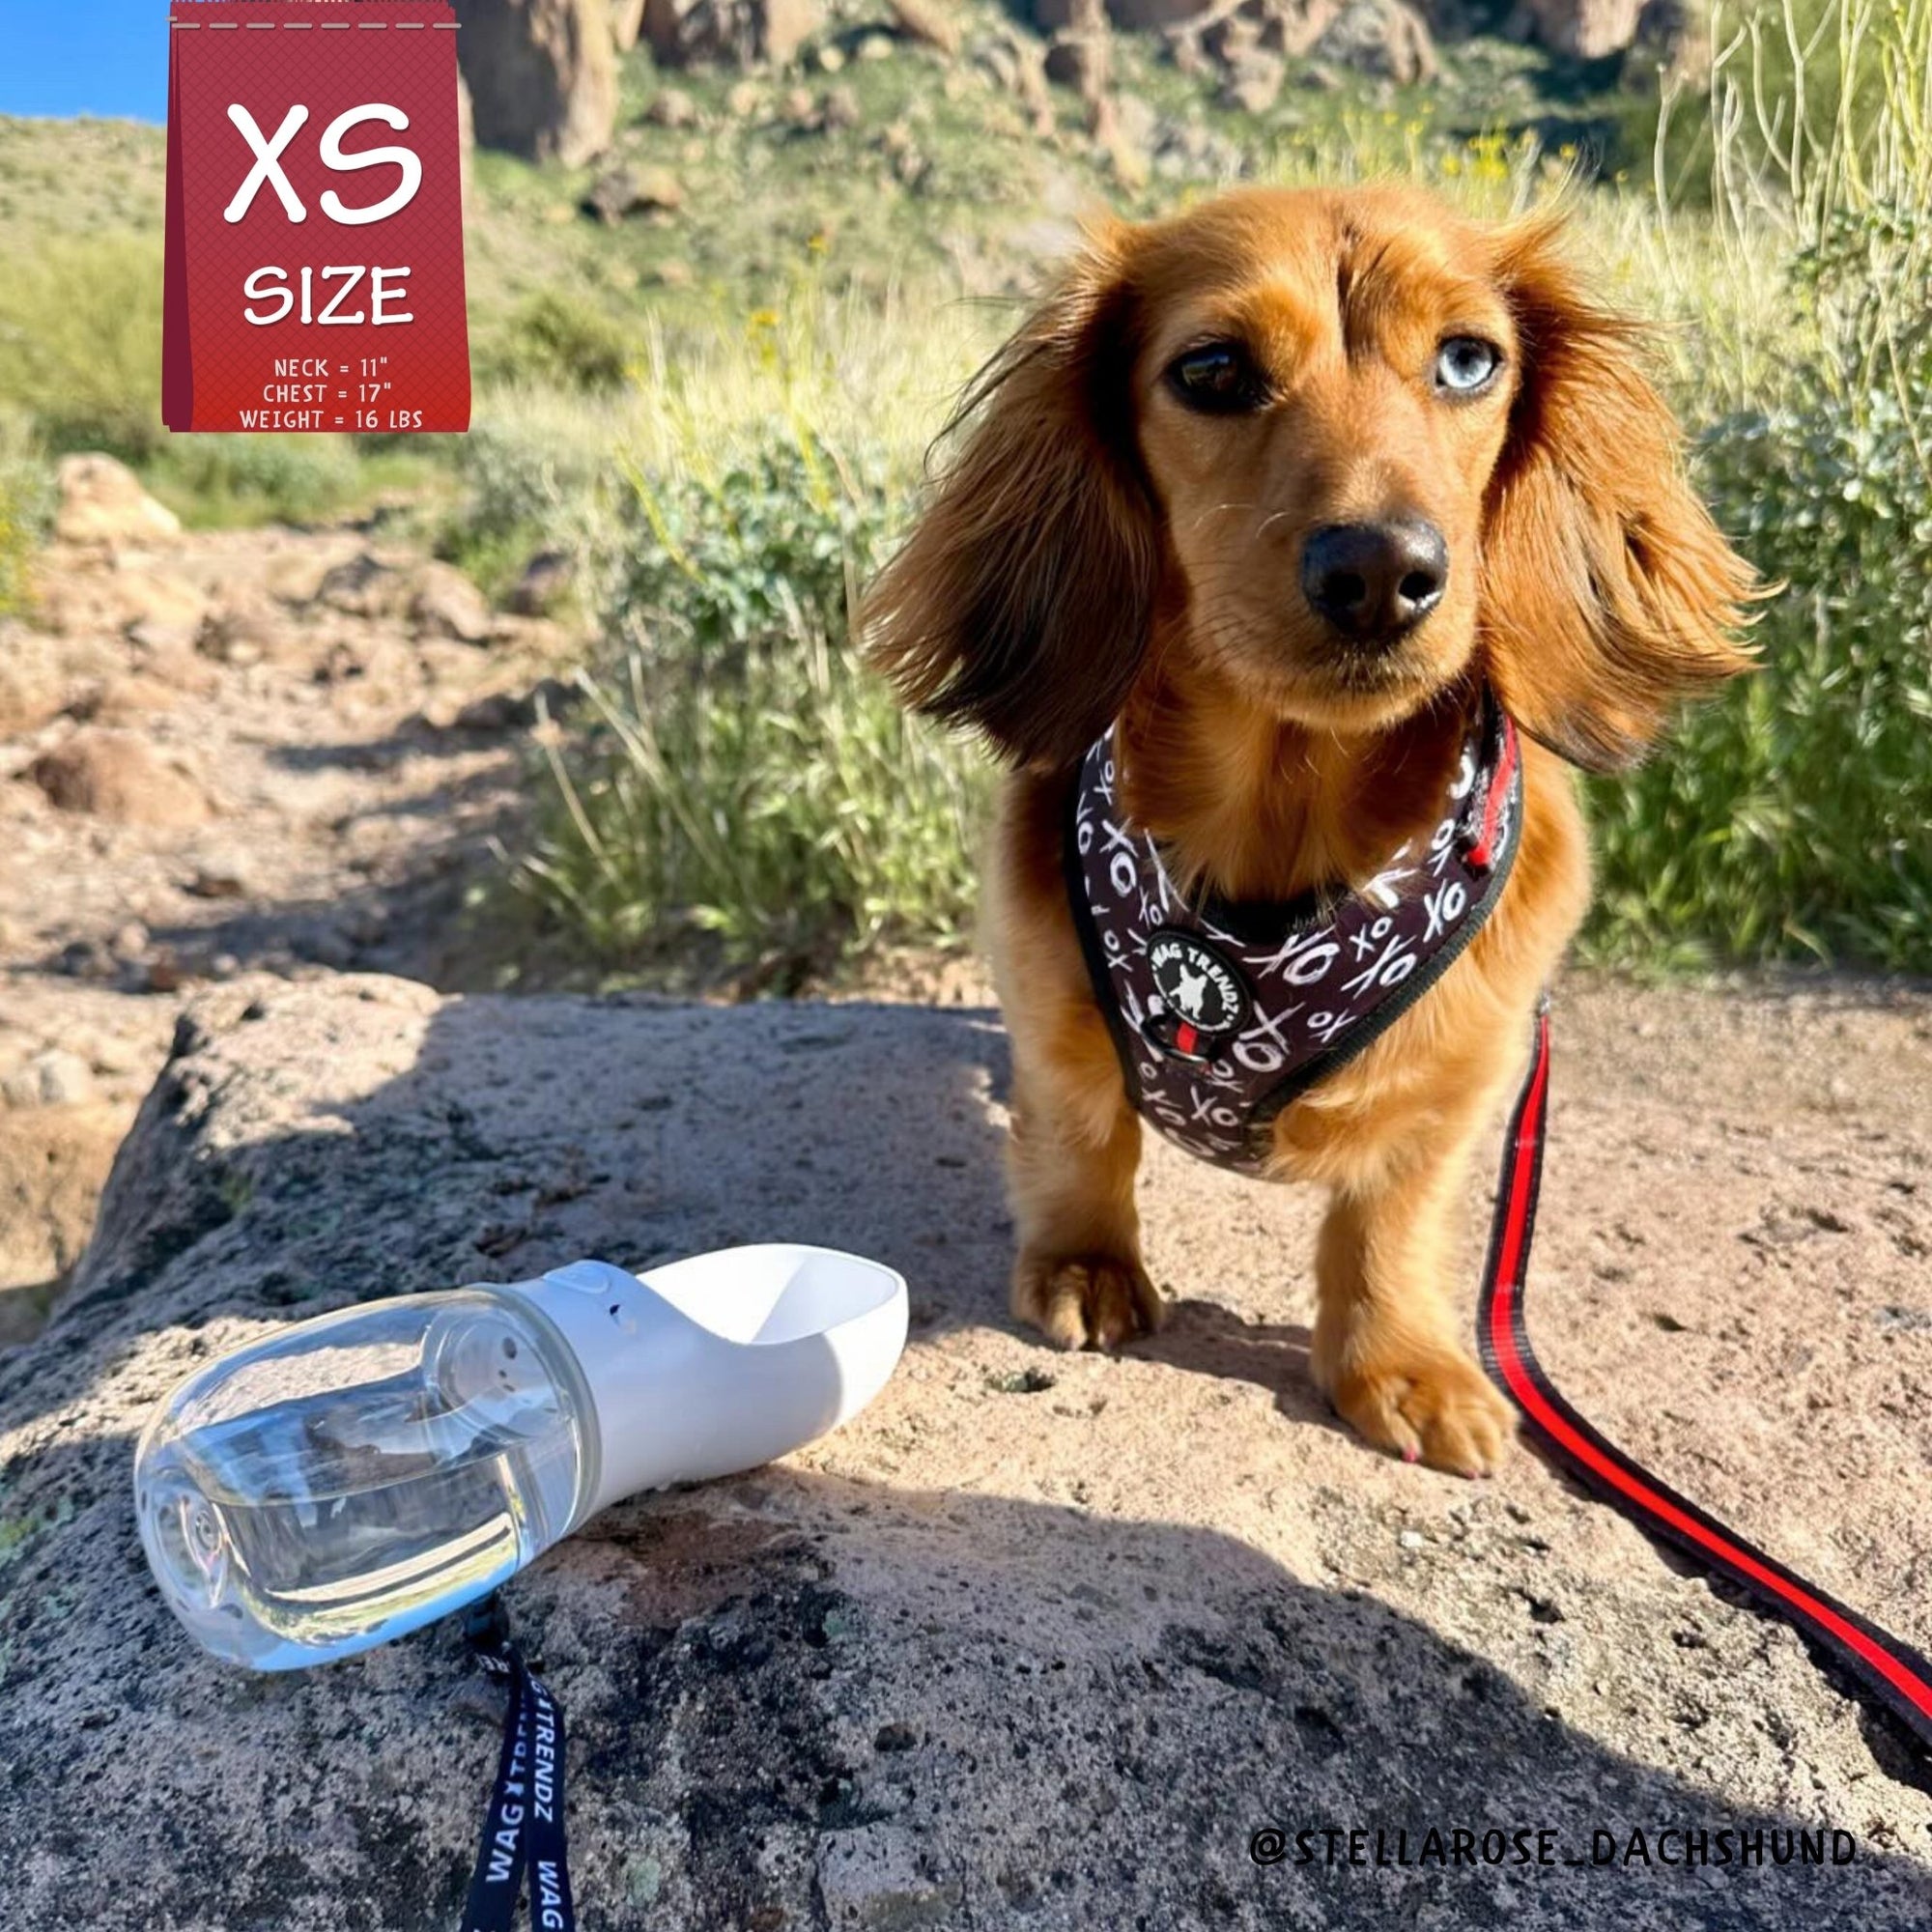 Dog Collar Harness and Leash Set - Longhair Dachshund wearing XS Dog Adjustable Harness in black and white XO&#39;s with bold Red accents with matching Dog Leash with portable dog water bottle  - on a rock with grass behind - Wag Trendz